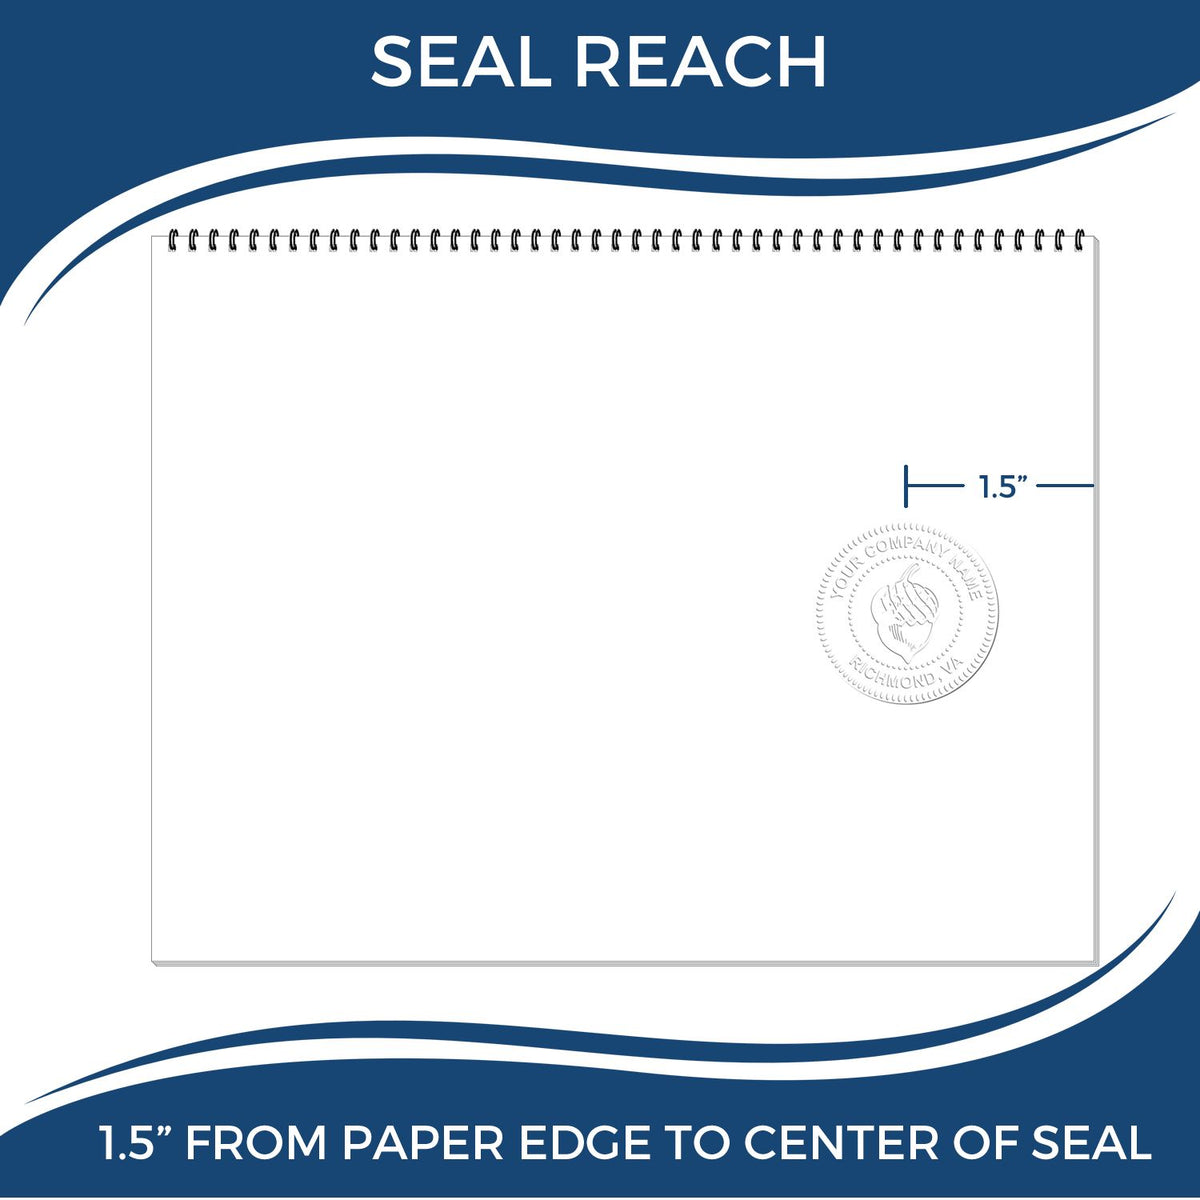 An infographic showing the seal reach which is represented by a ruler and a miniature seal image of the Gift Indiana Land Surveyor Seal